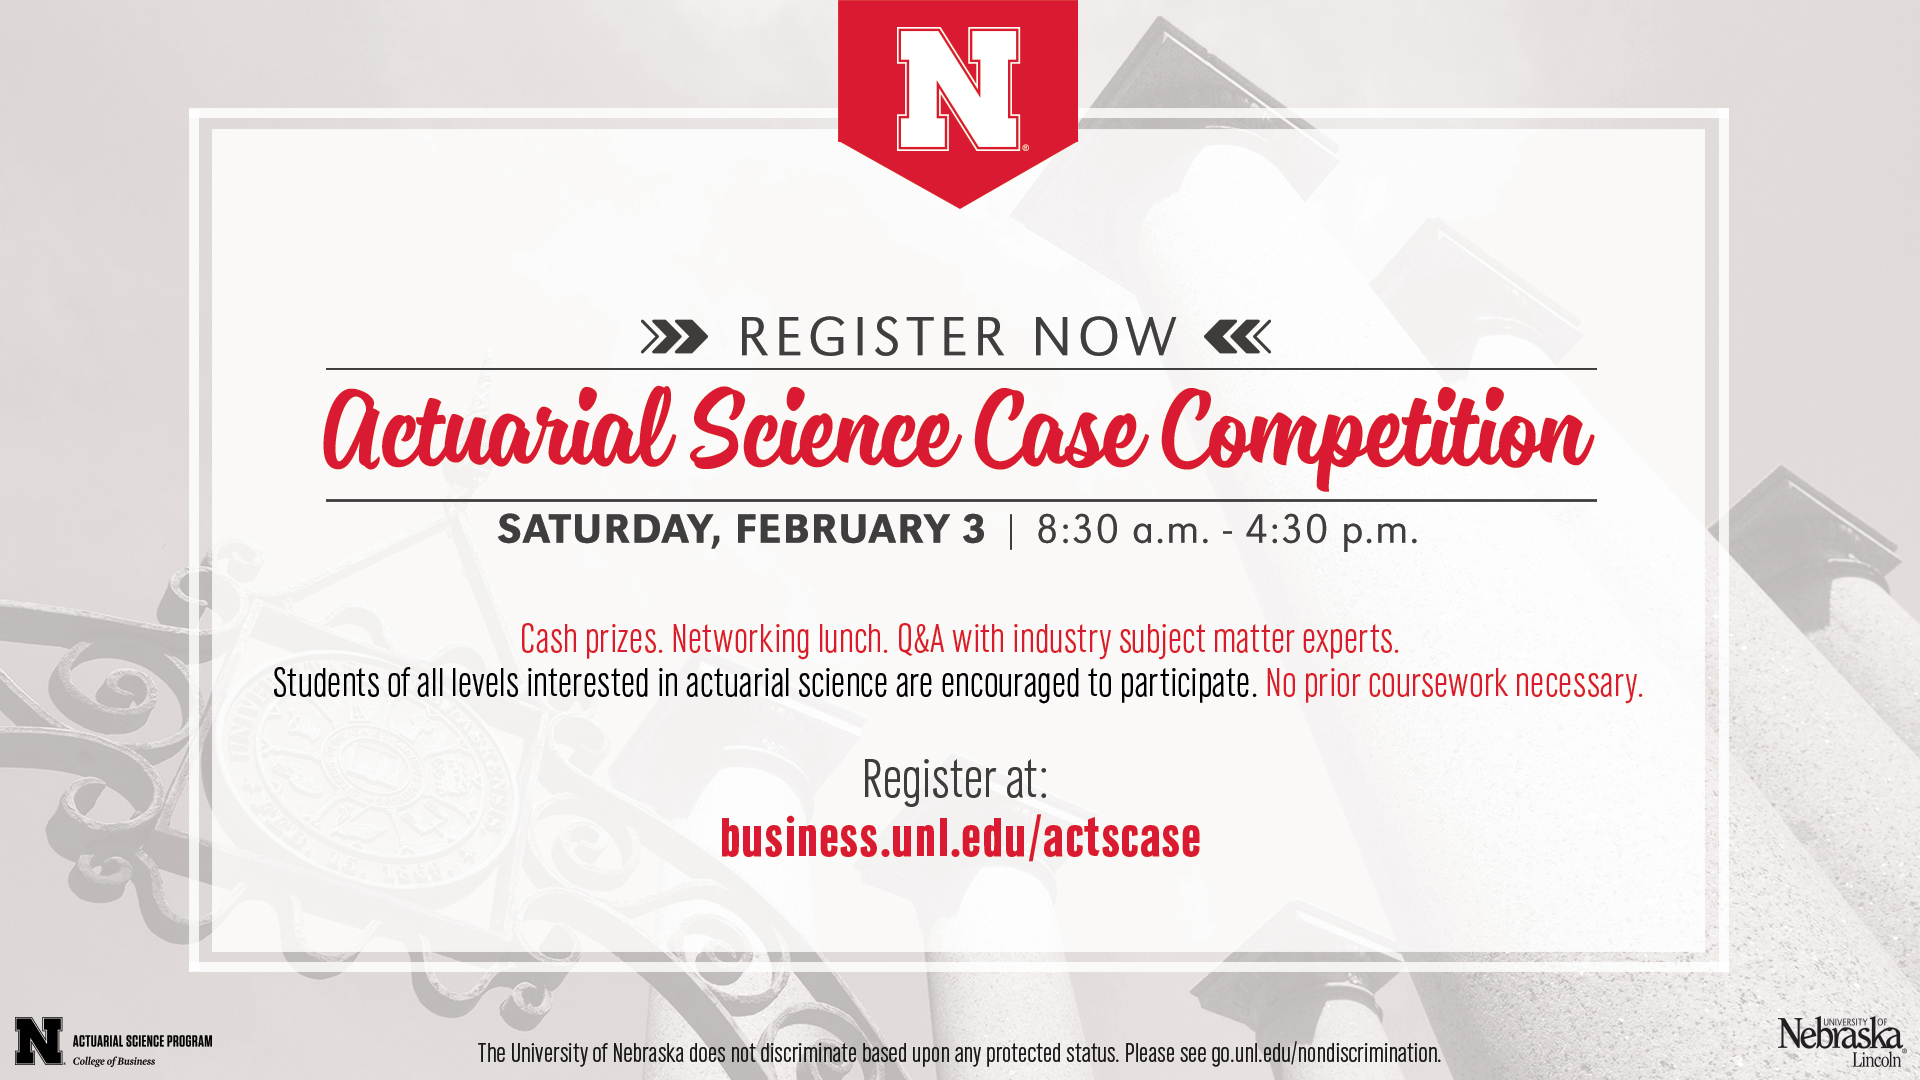 Actuarial Science Case Competition is Feb. 3.